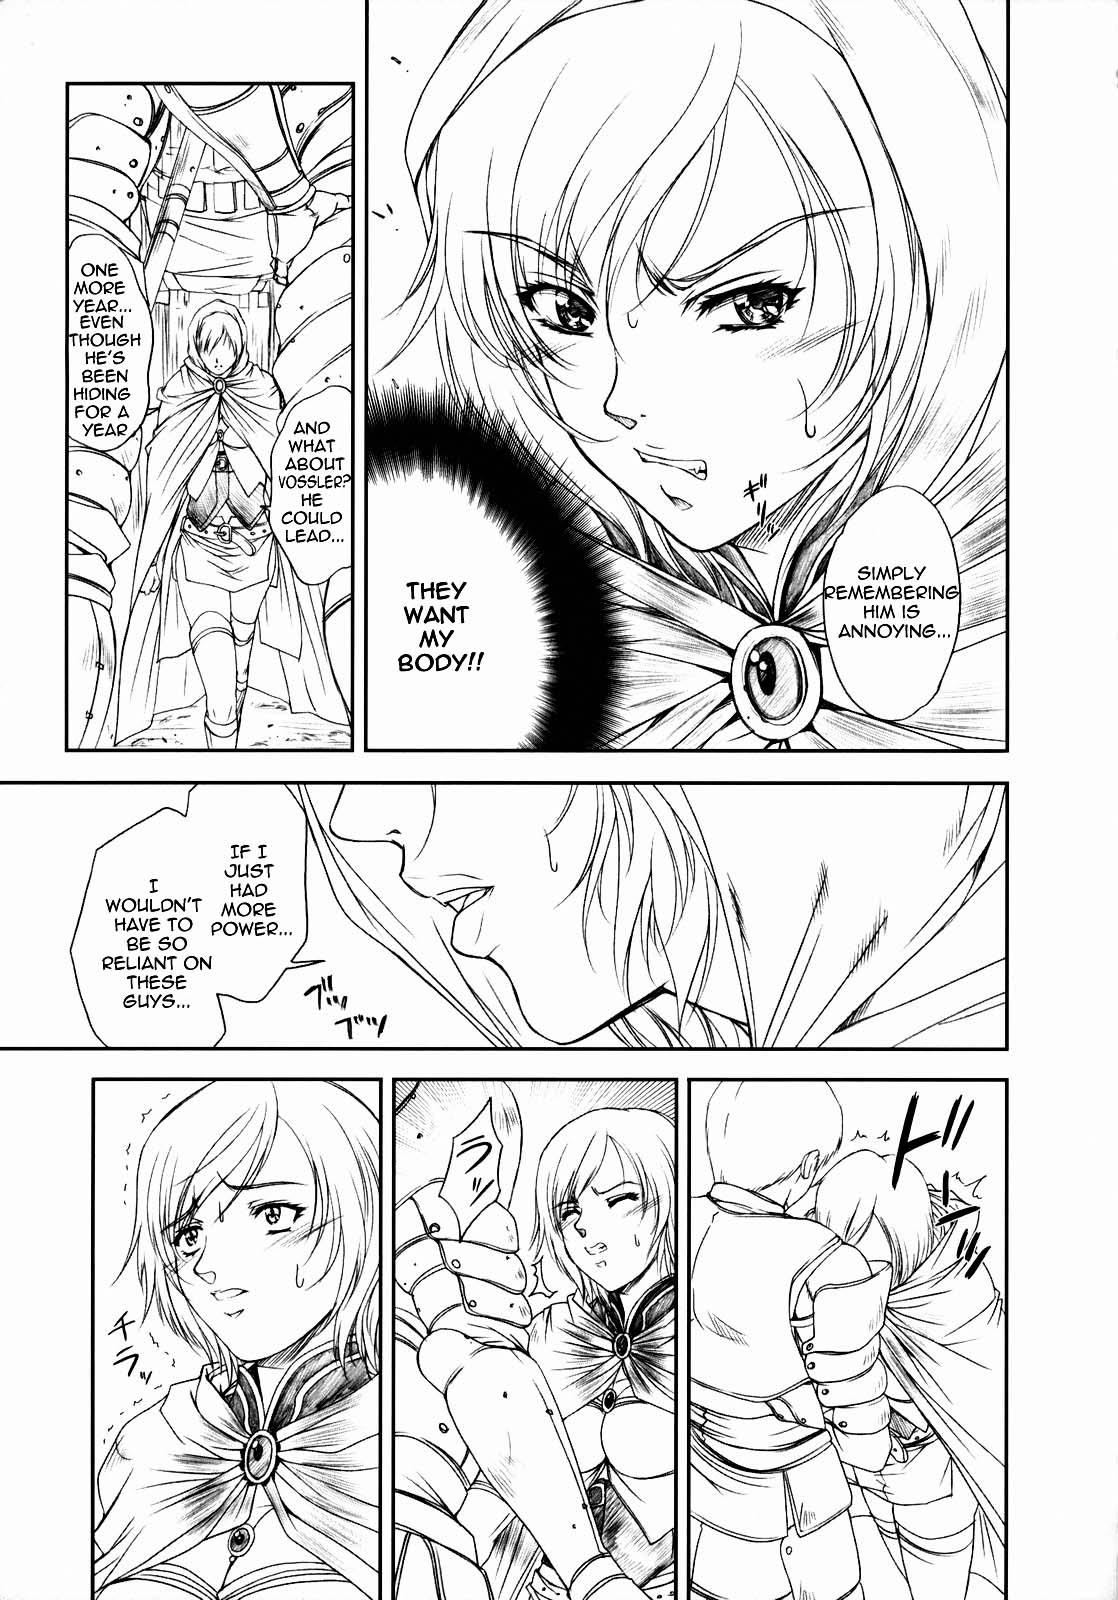 Groping Doll - Final fantasy xii Old And Young - Page 6